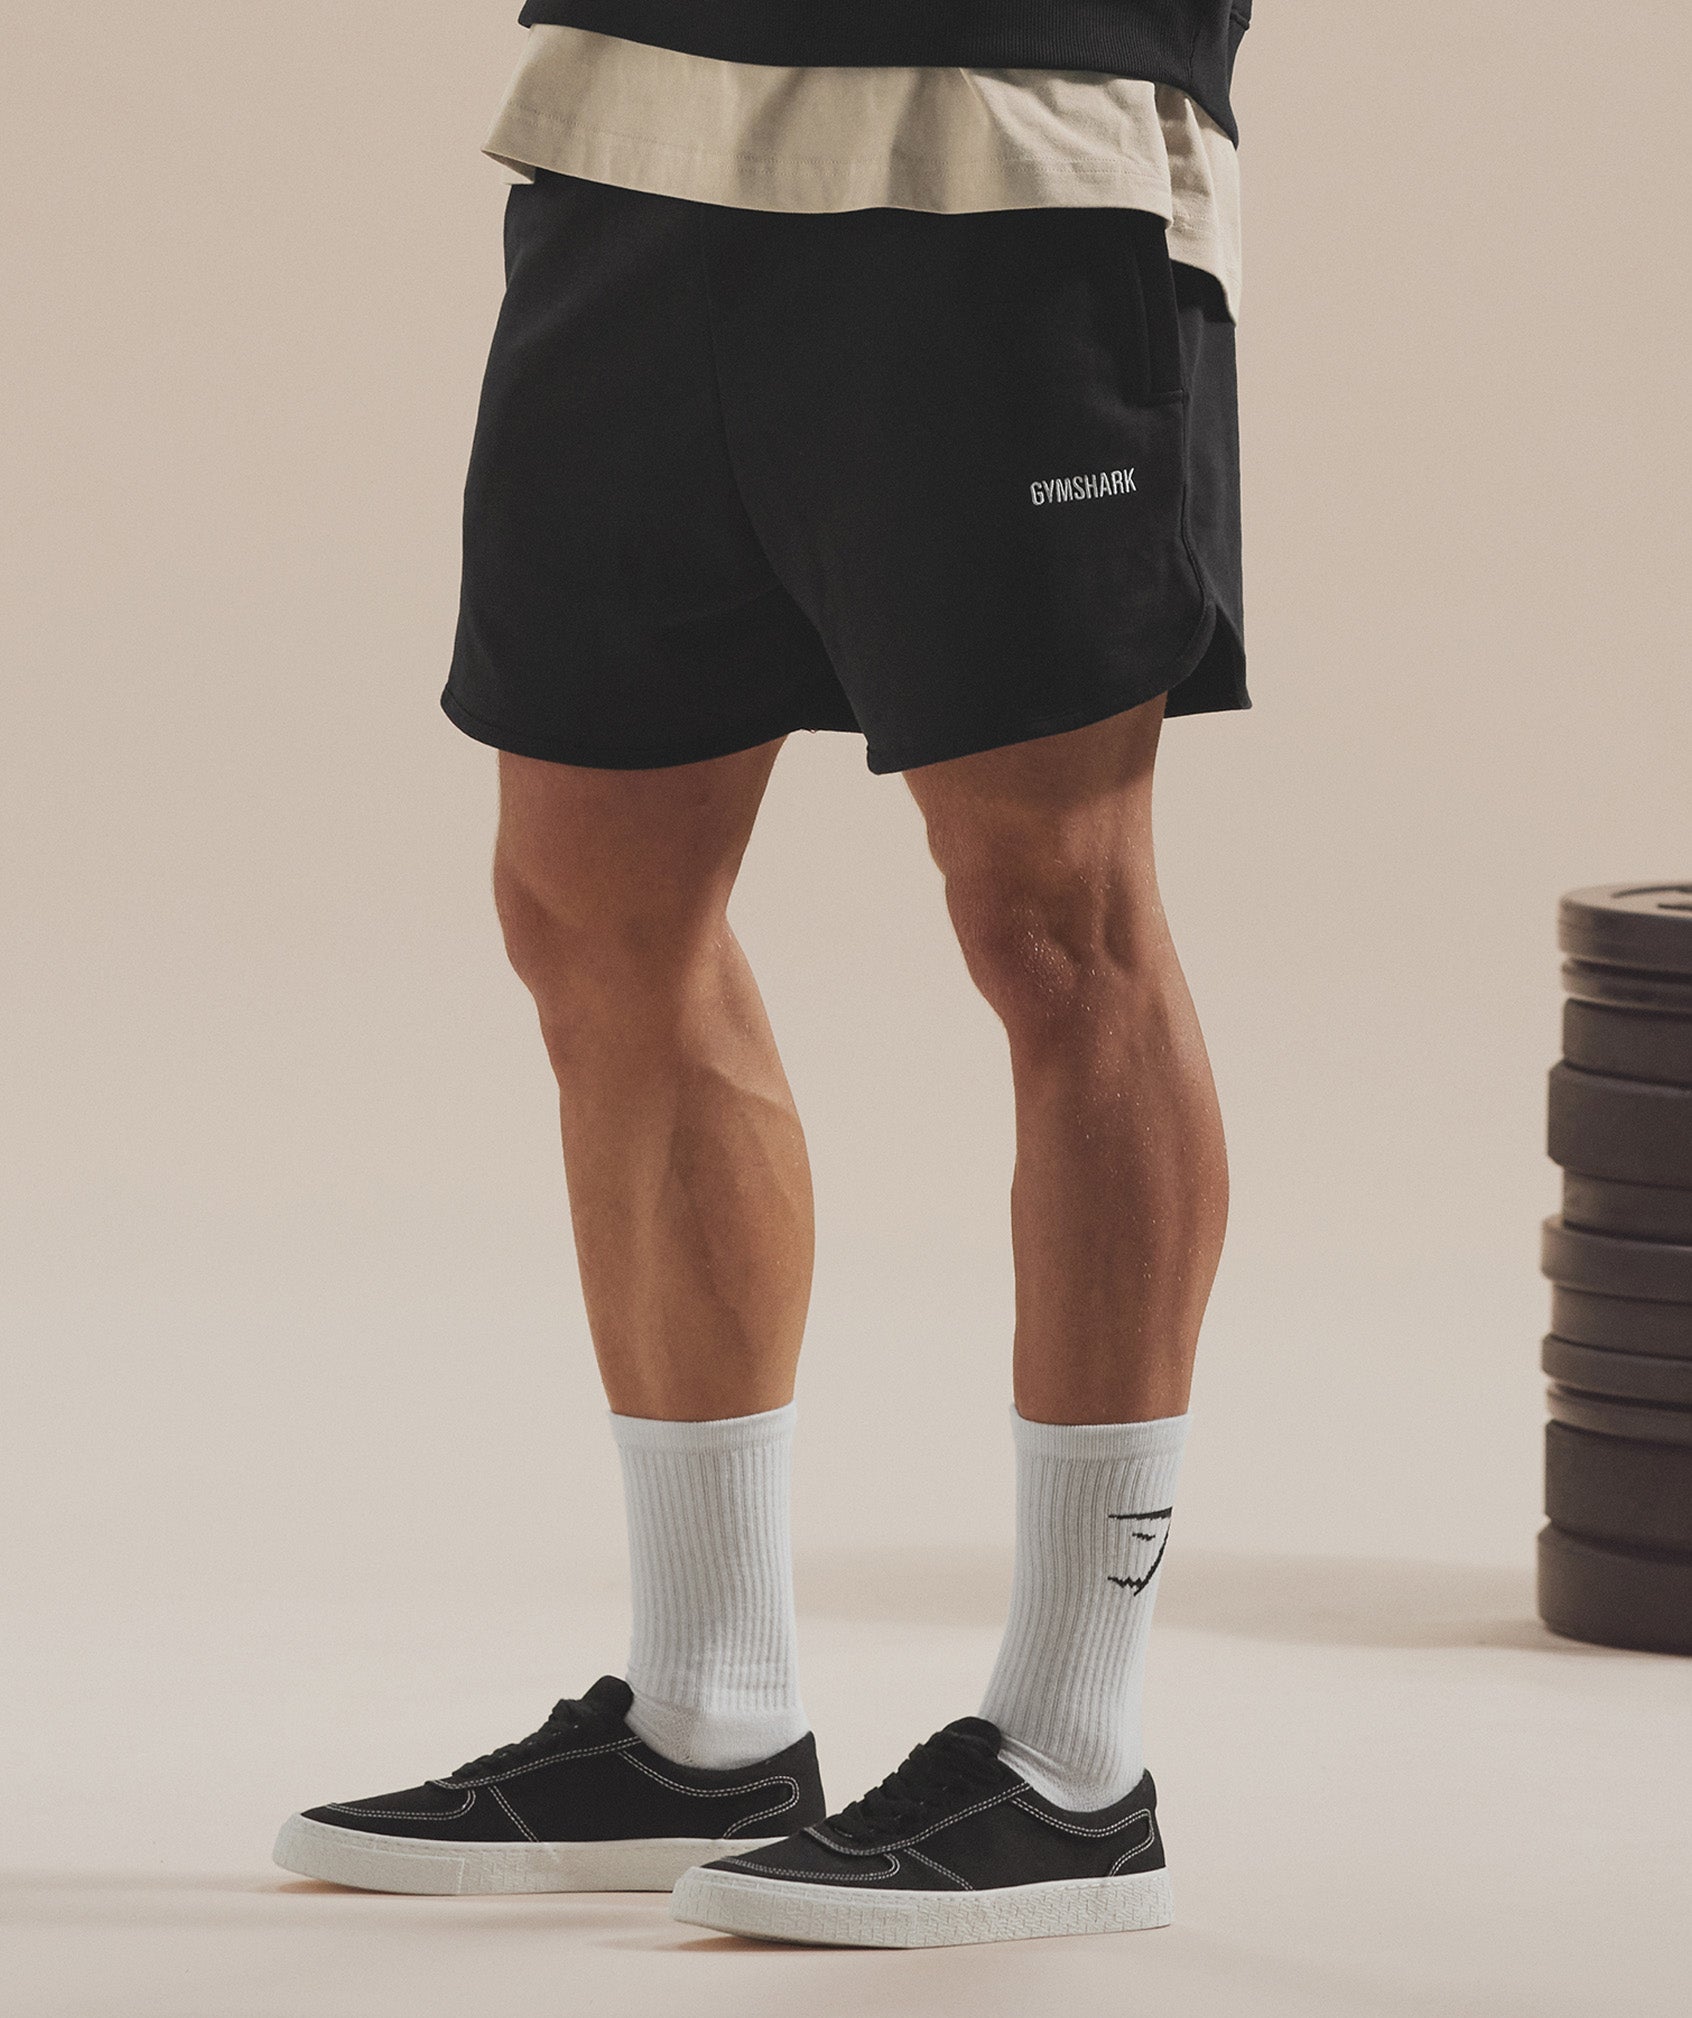 Rest Day Sweats 4'' Lounge Shorts in Black - view 1